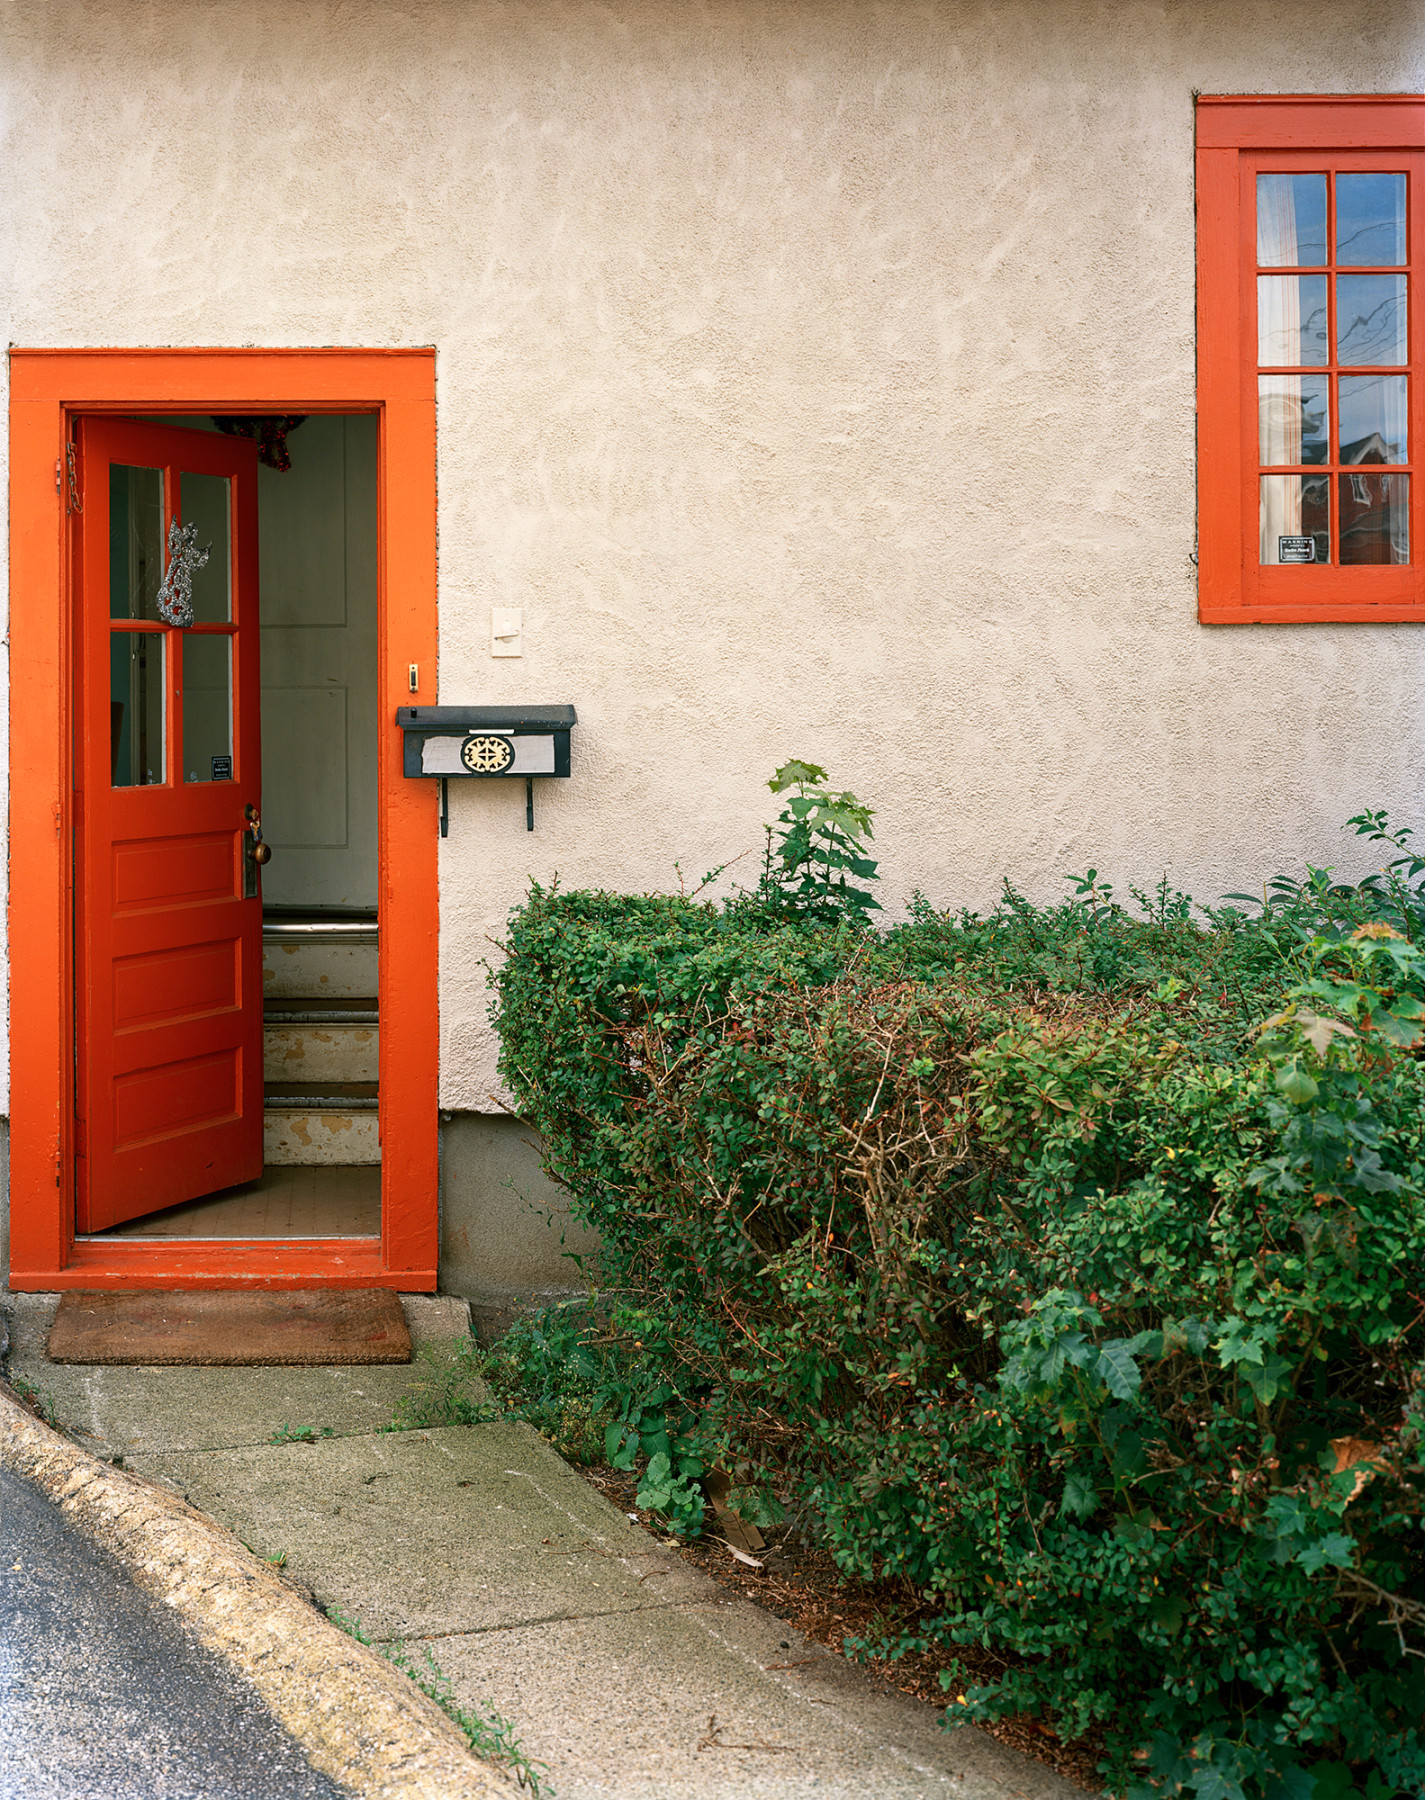 Photograph of exterior of building with orange door and window and shrub, by Jade Doskow.